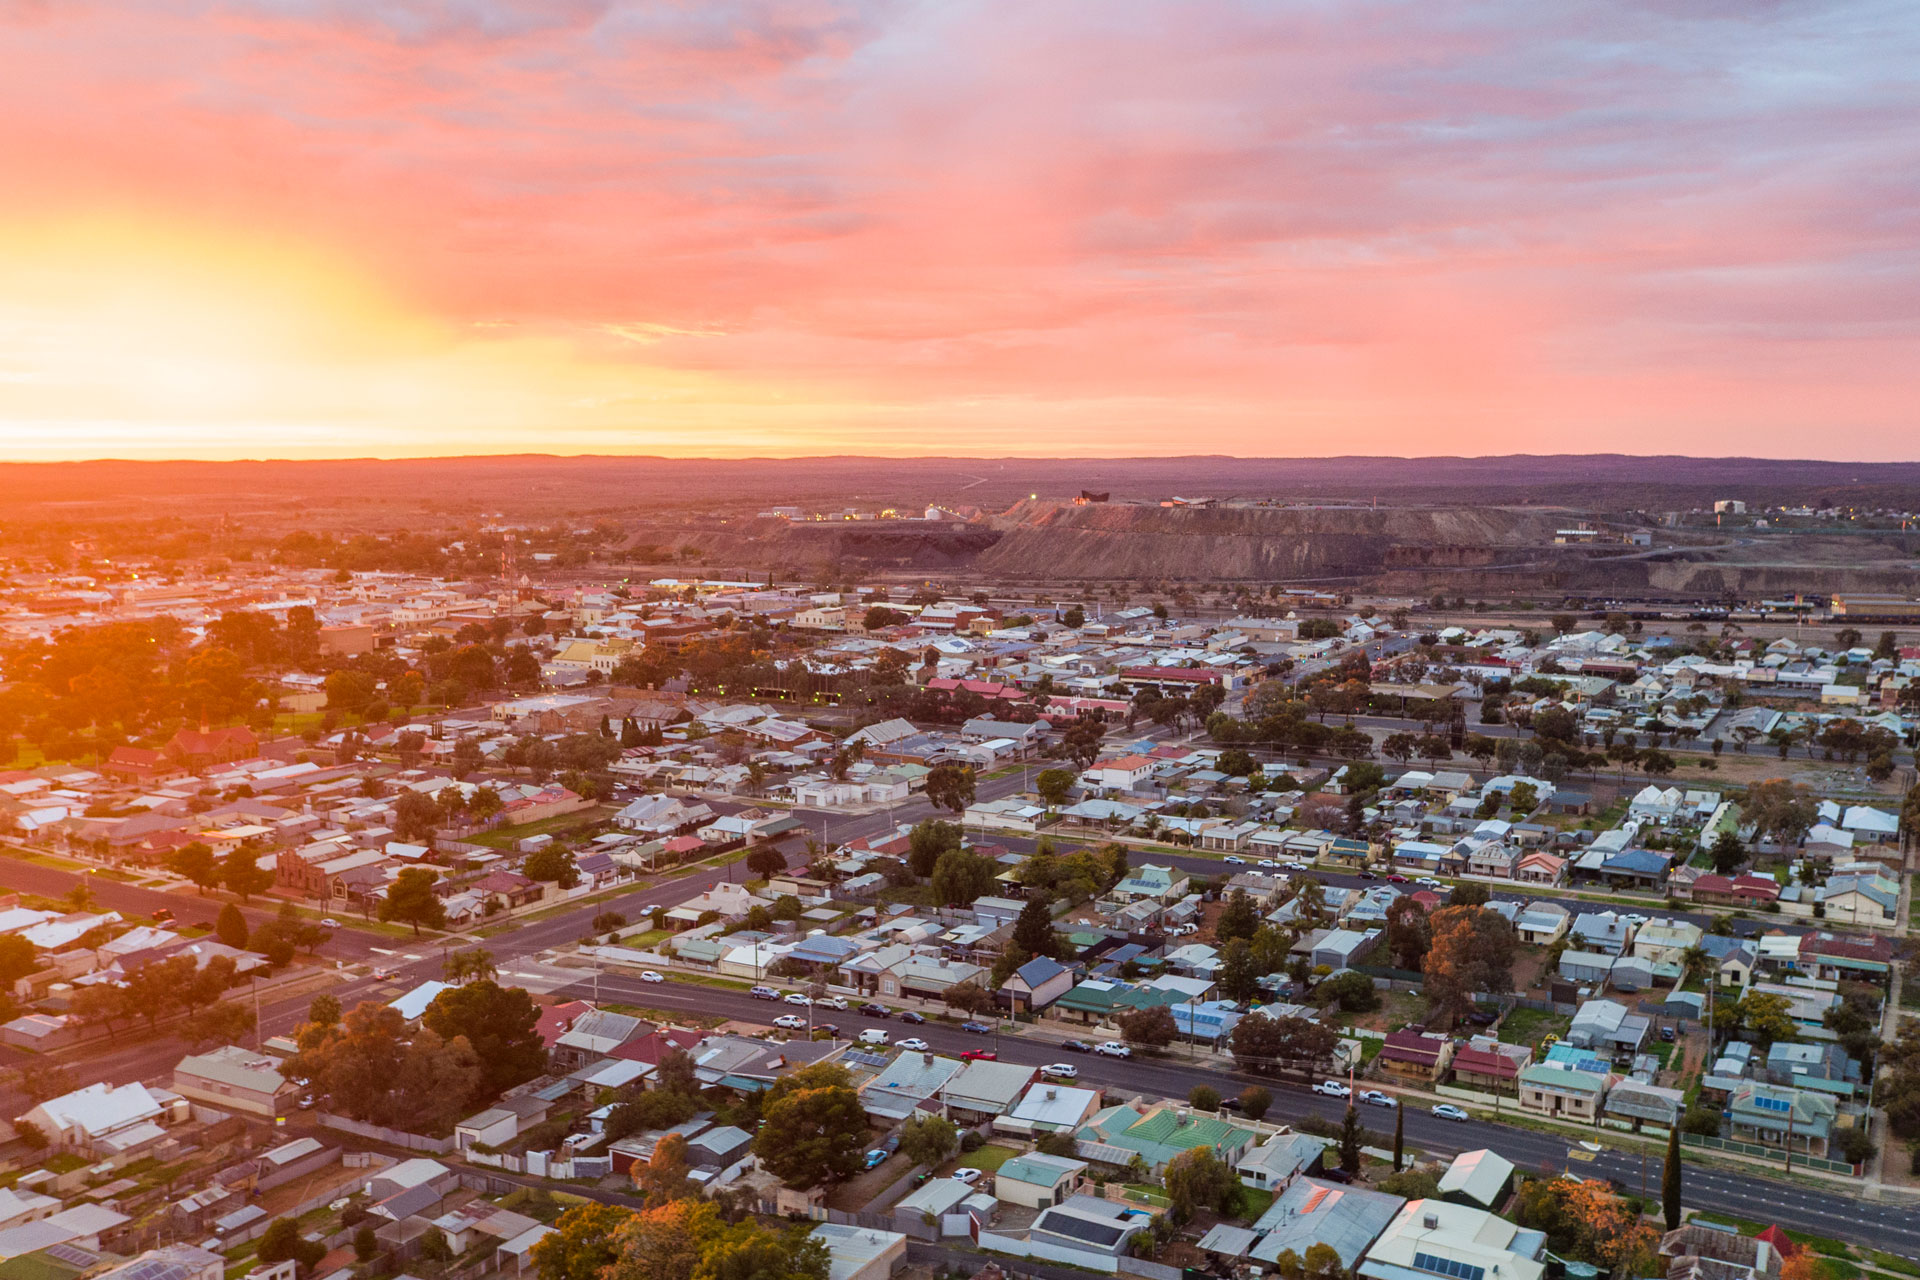 The City of Broken Hill. Photo Credit: Destination NSW